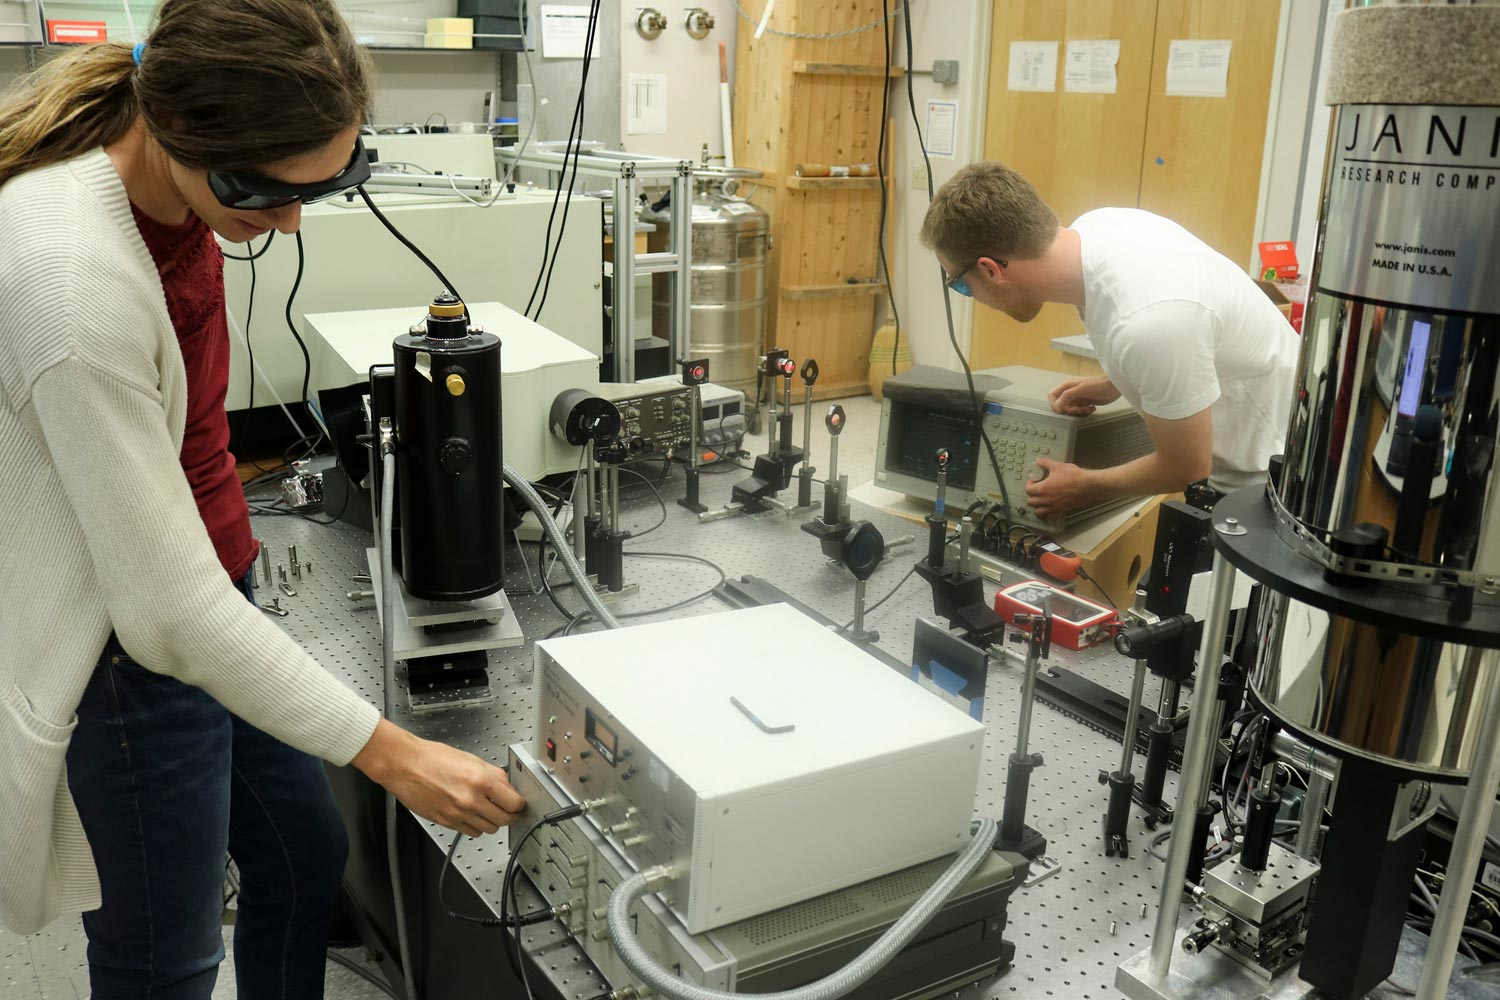 Ph.D. candidates Erica Calman and Lewis Fowler-Gerace adjust the electronics and optics used for the experiment